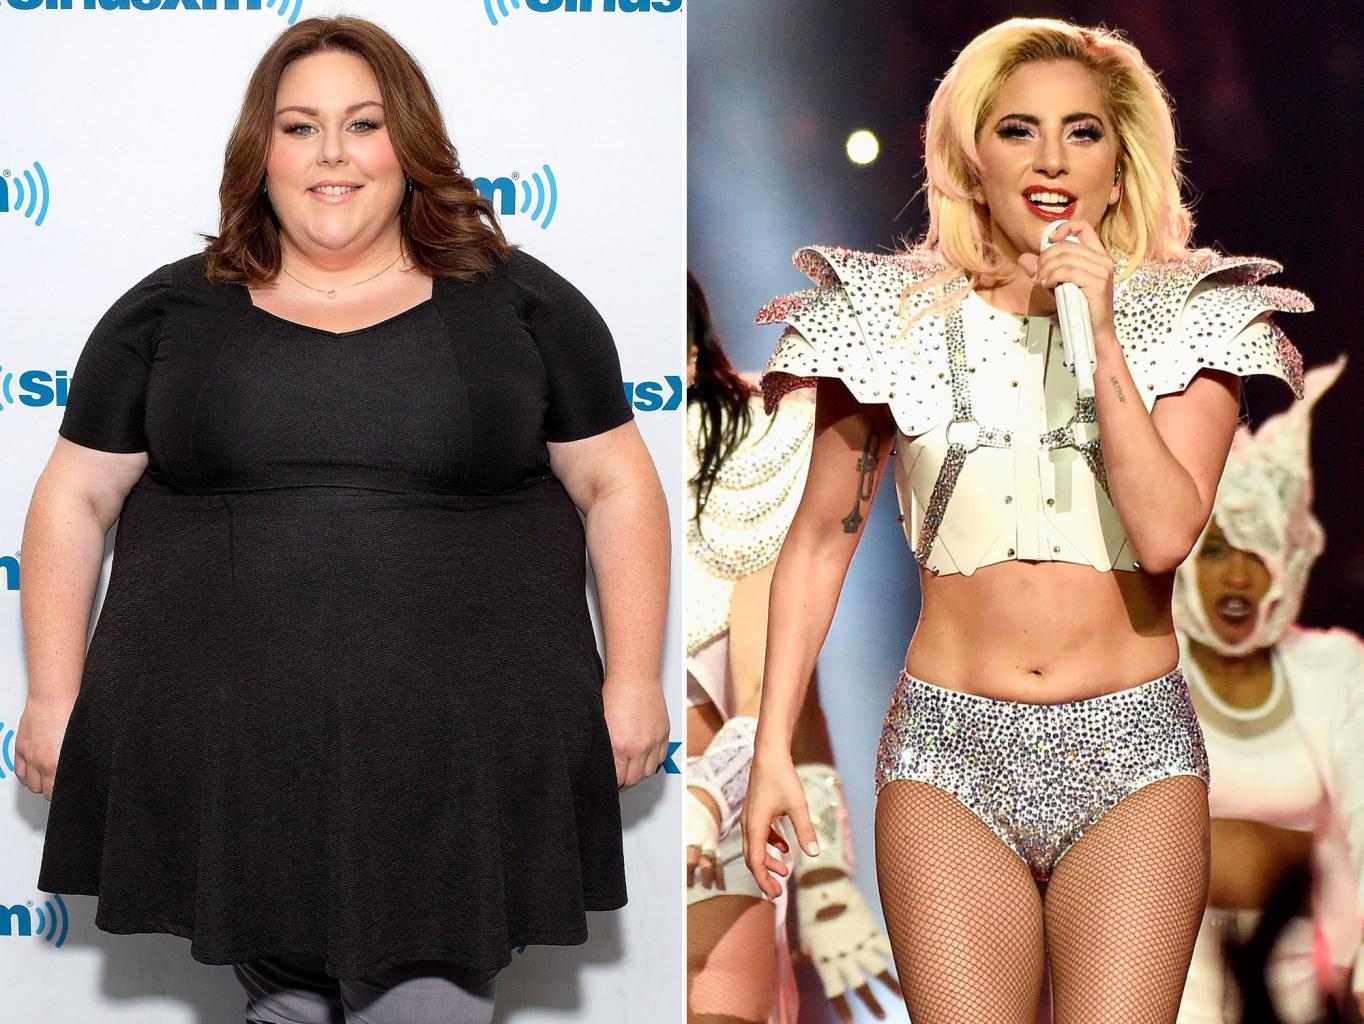 Chrissy Metz Slams Body Shamers Who Criticized Lady Gaga After Super Bowl Halftime Show